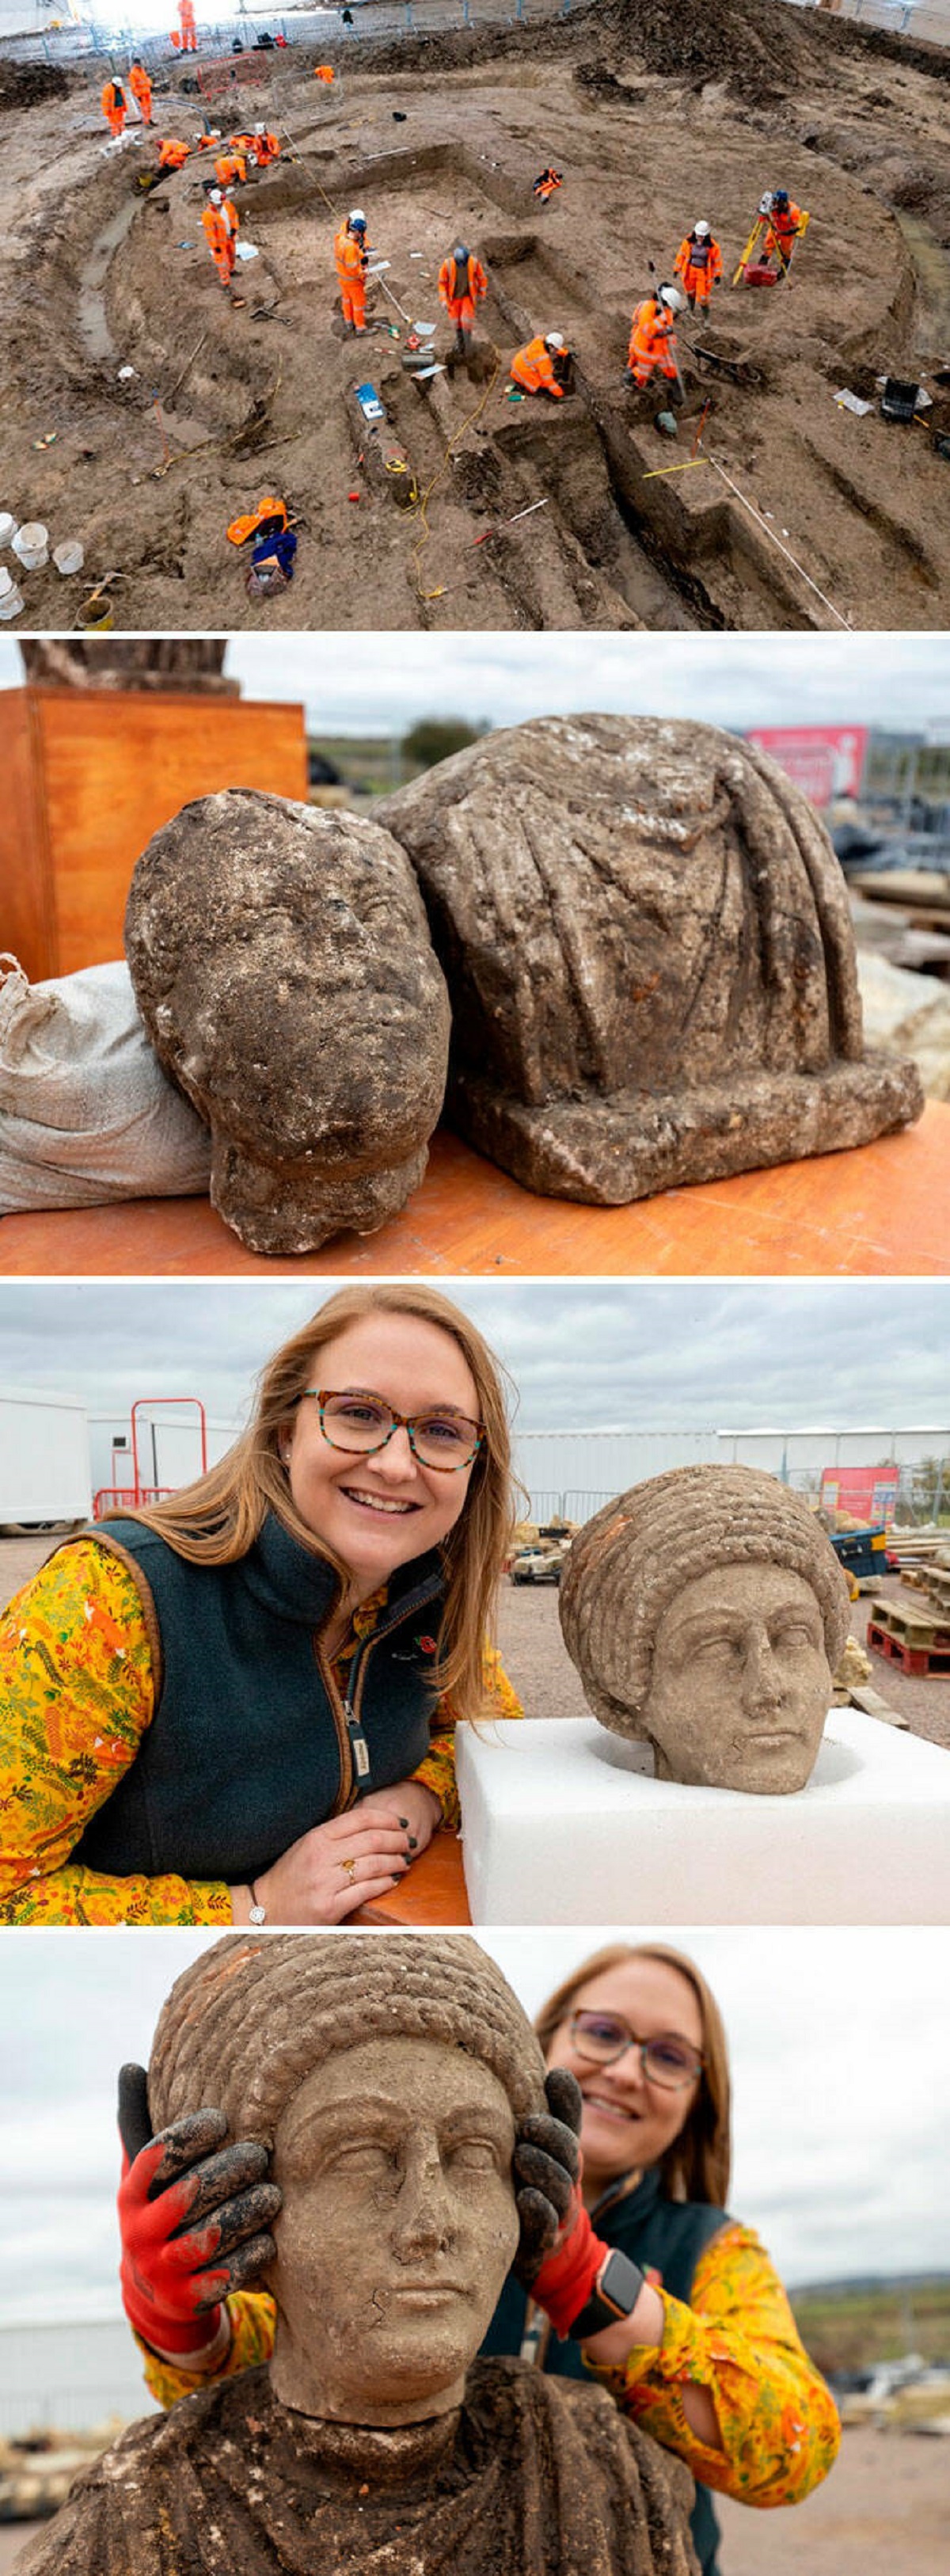 "Incredible Rare Roman Statues Found In HS2 Rail Construction Dig"